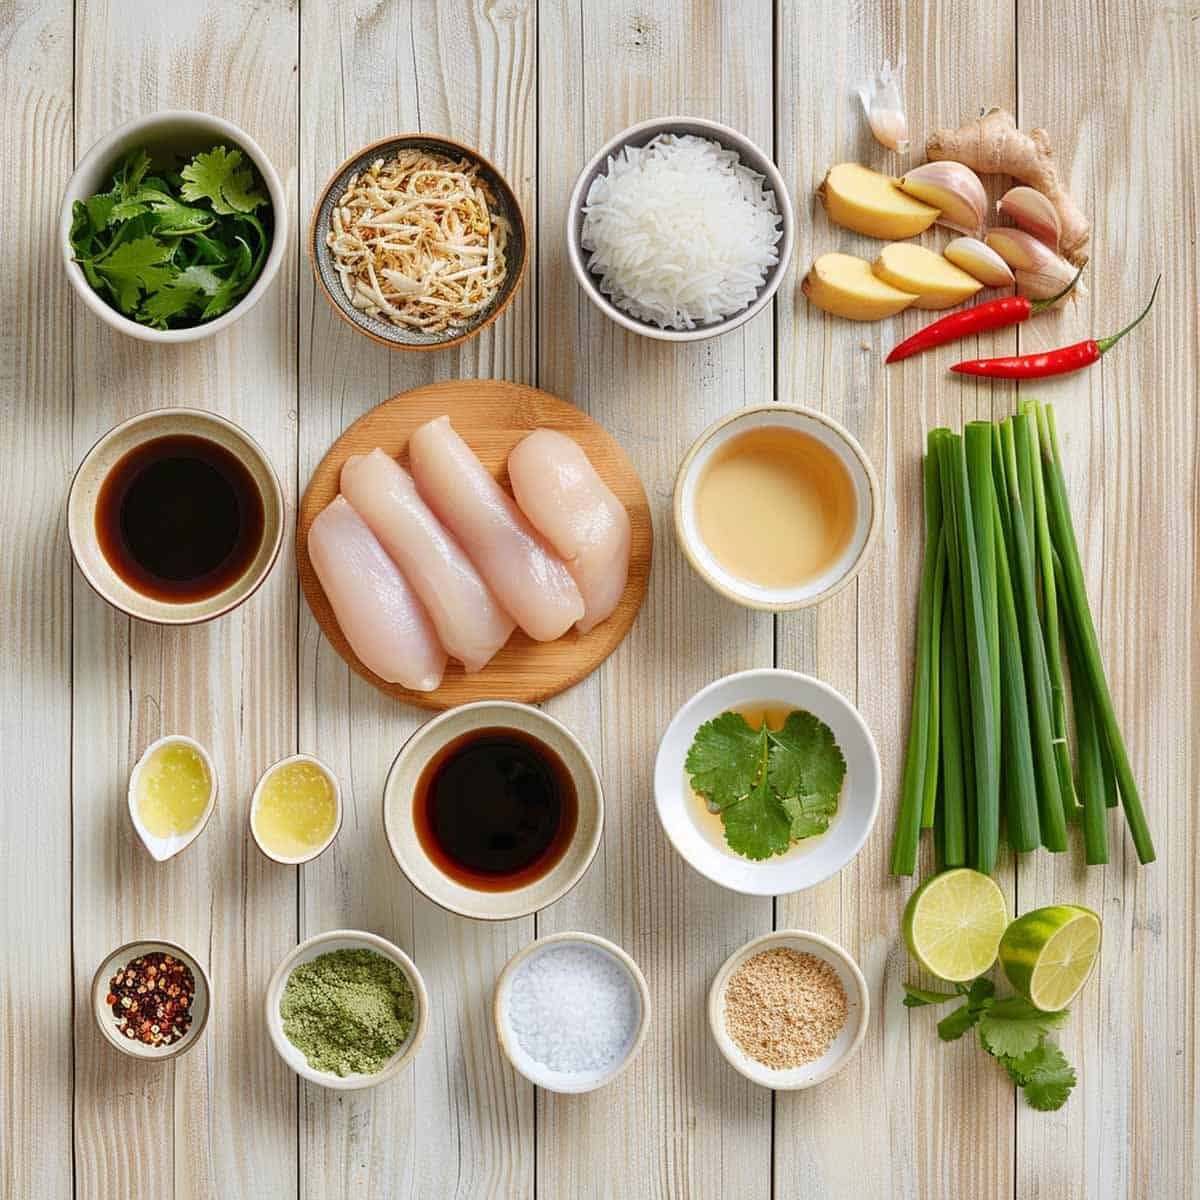 An image displaying all the ingredients for Thai Rice Soup (Khao Tom)arranged on a light-colored surface. Visible items include a bowl of uncooked jasmine rice, small bowls containing fish sauce and soy sauce, fresh cilantro, green onions, lime wedges, sliced ginger, minced garlic, and options of raw chicken, shrimp, and pork. The ingredients are neatly organized, showcasing their natural colors and textures, ready for cooking.